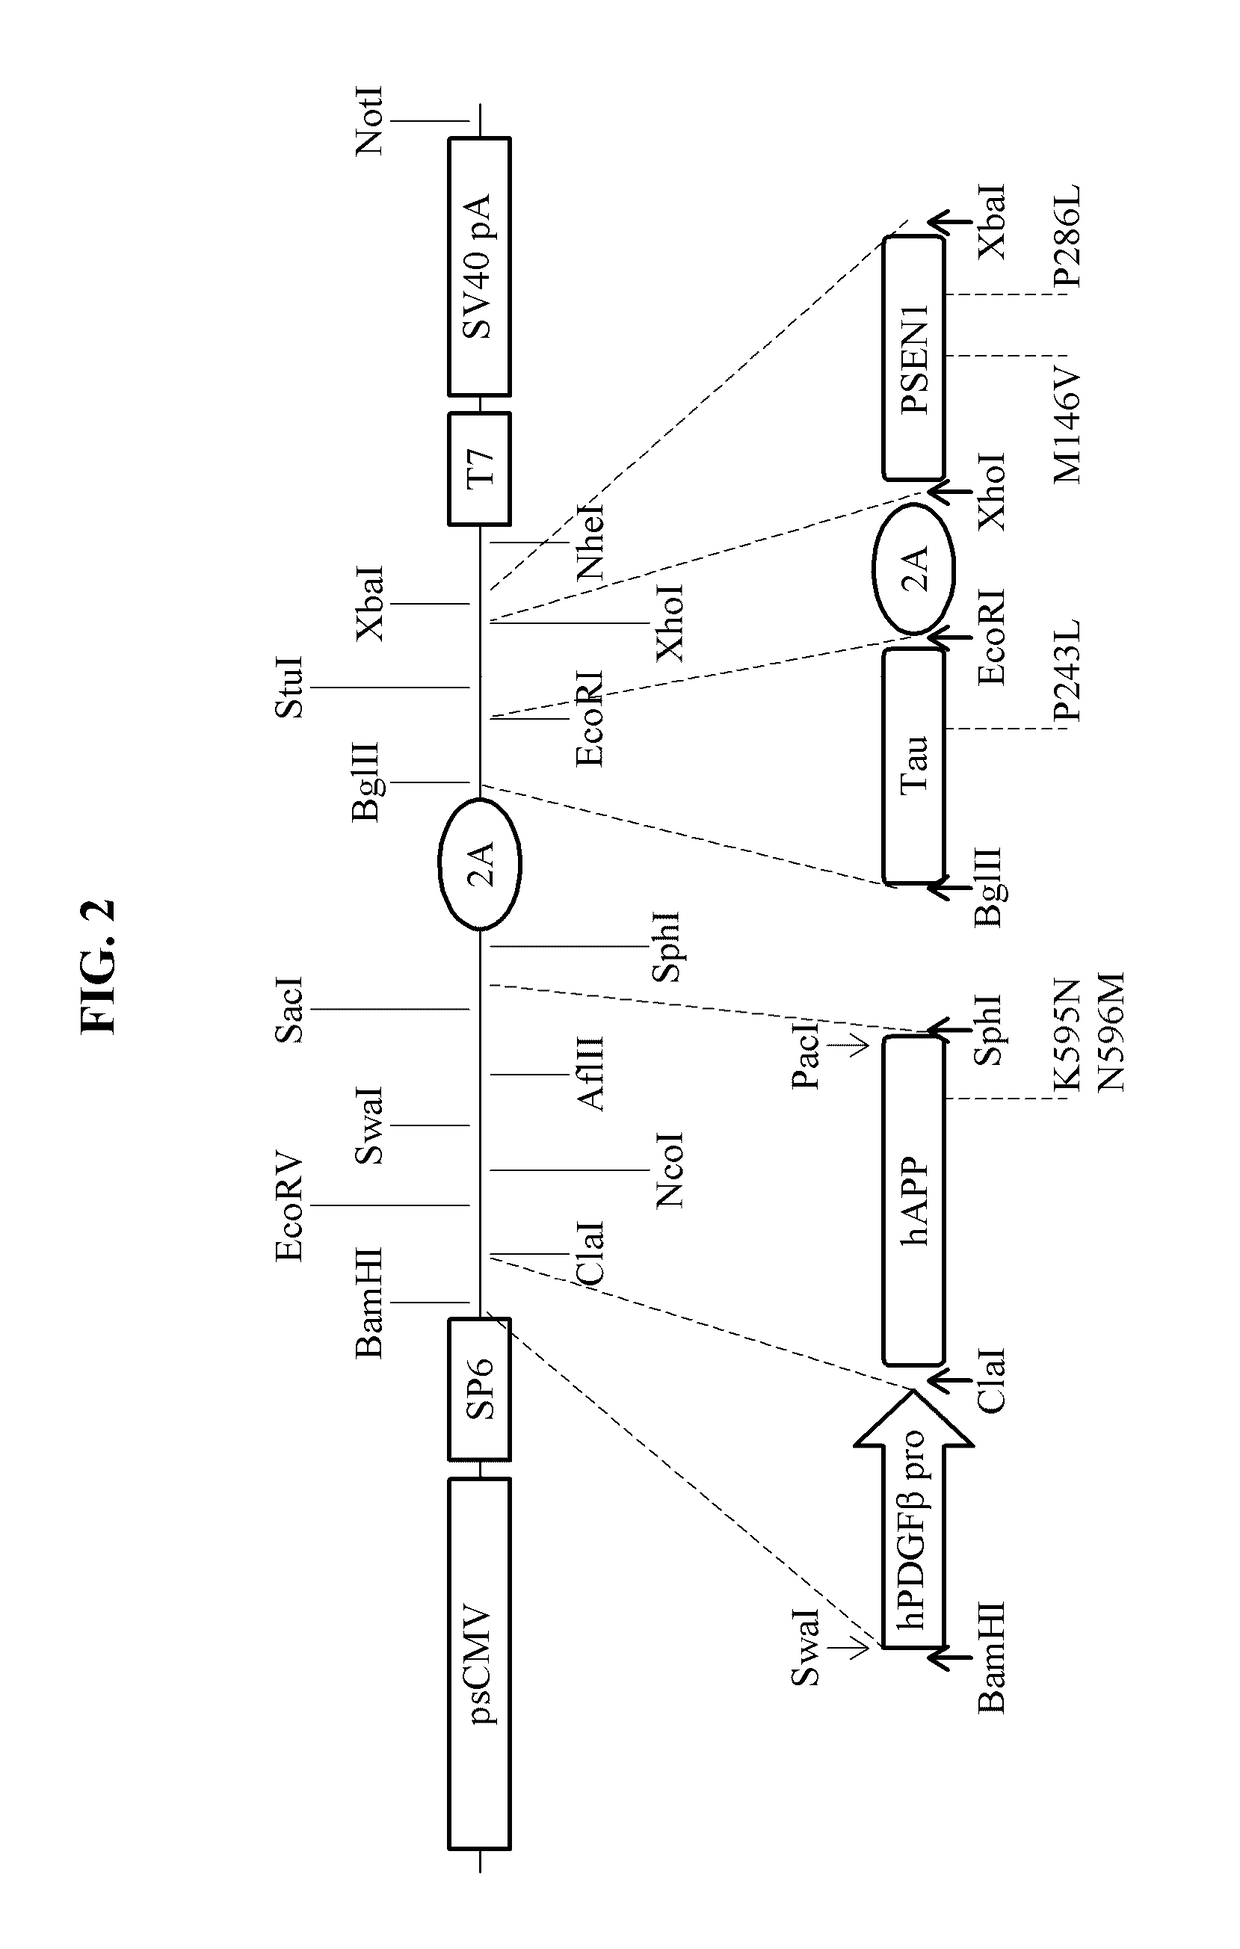 Expression cassette and vector comprising alzheimer's disease-related mutant genes and cell line transformed by means of same